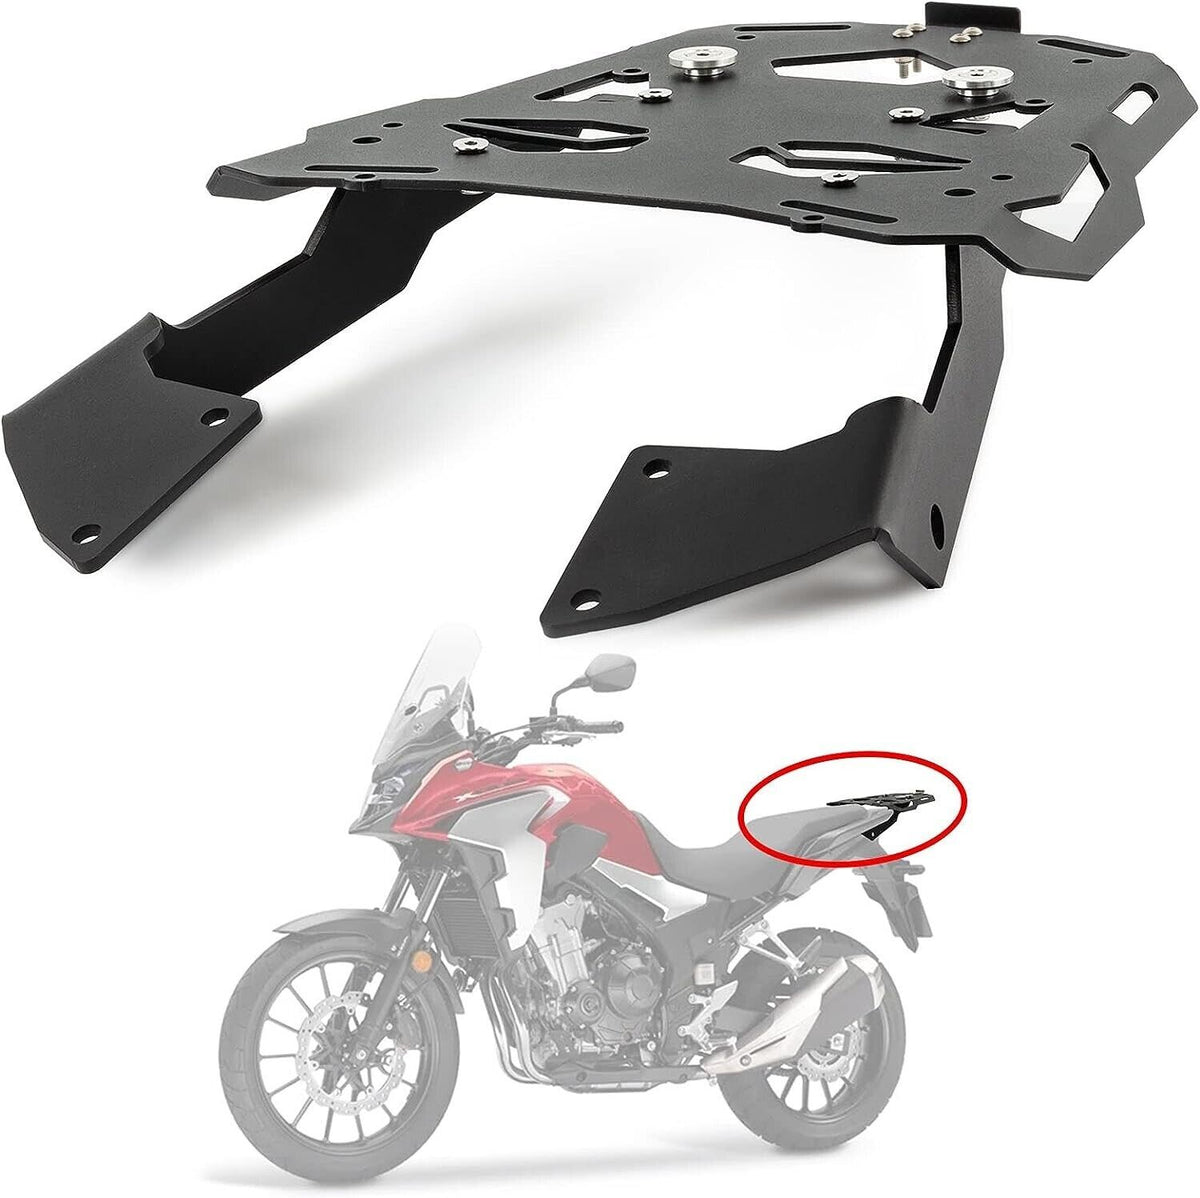 PSLER Motorcycle Rear Carrier Luggage Rack for CB500X, CB500F, CB400X